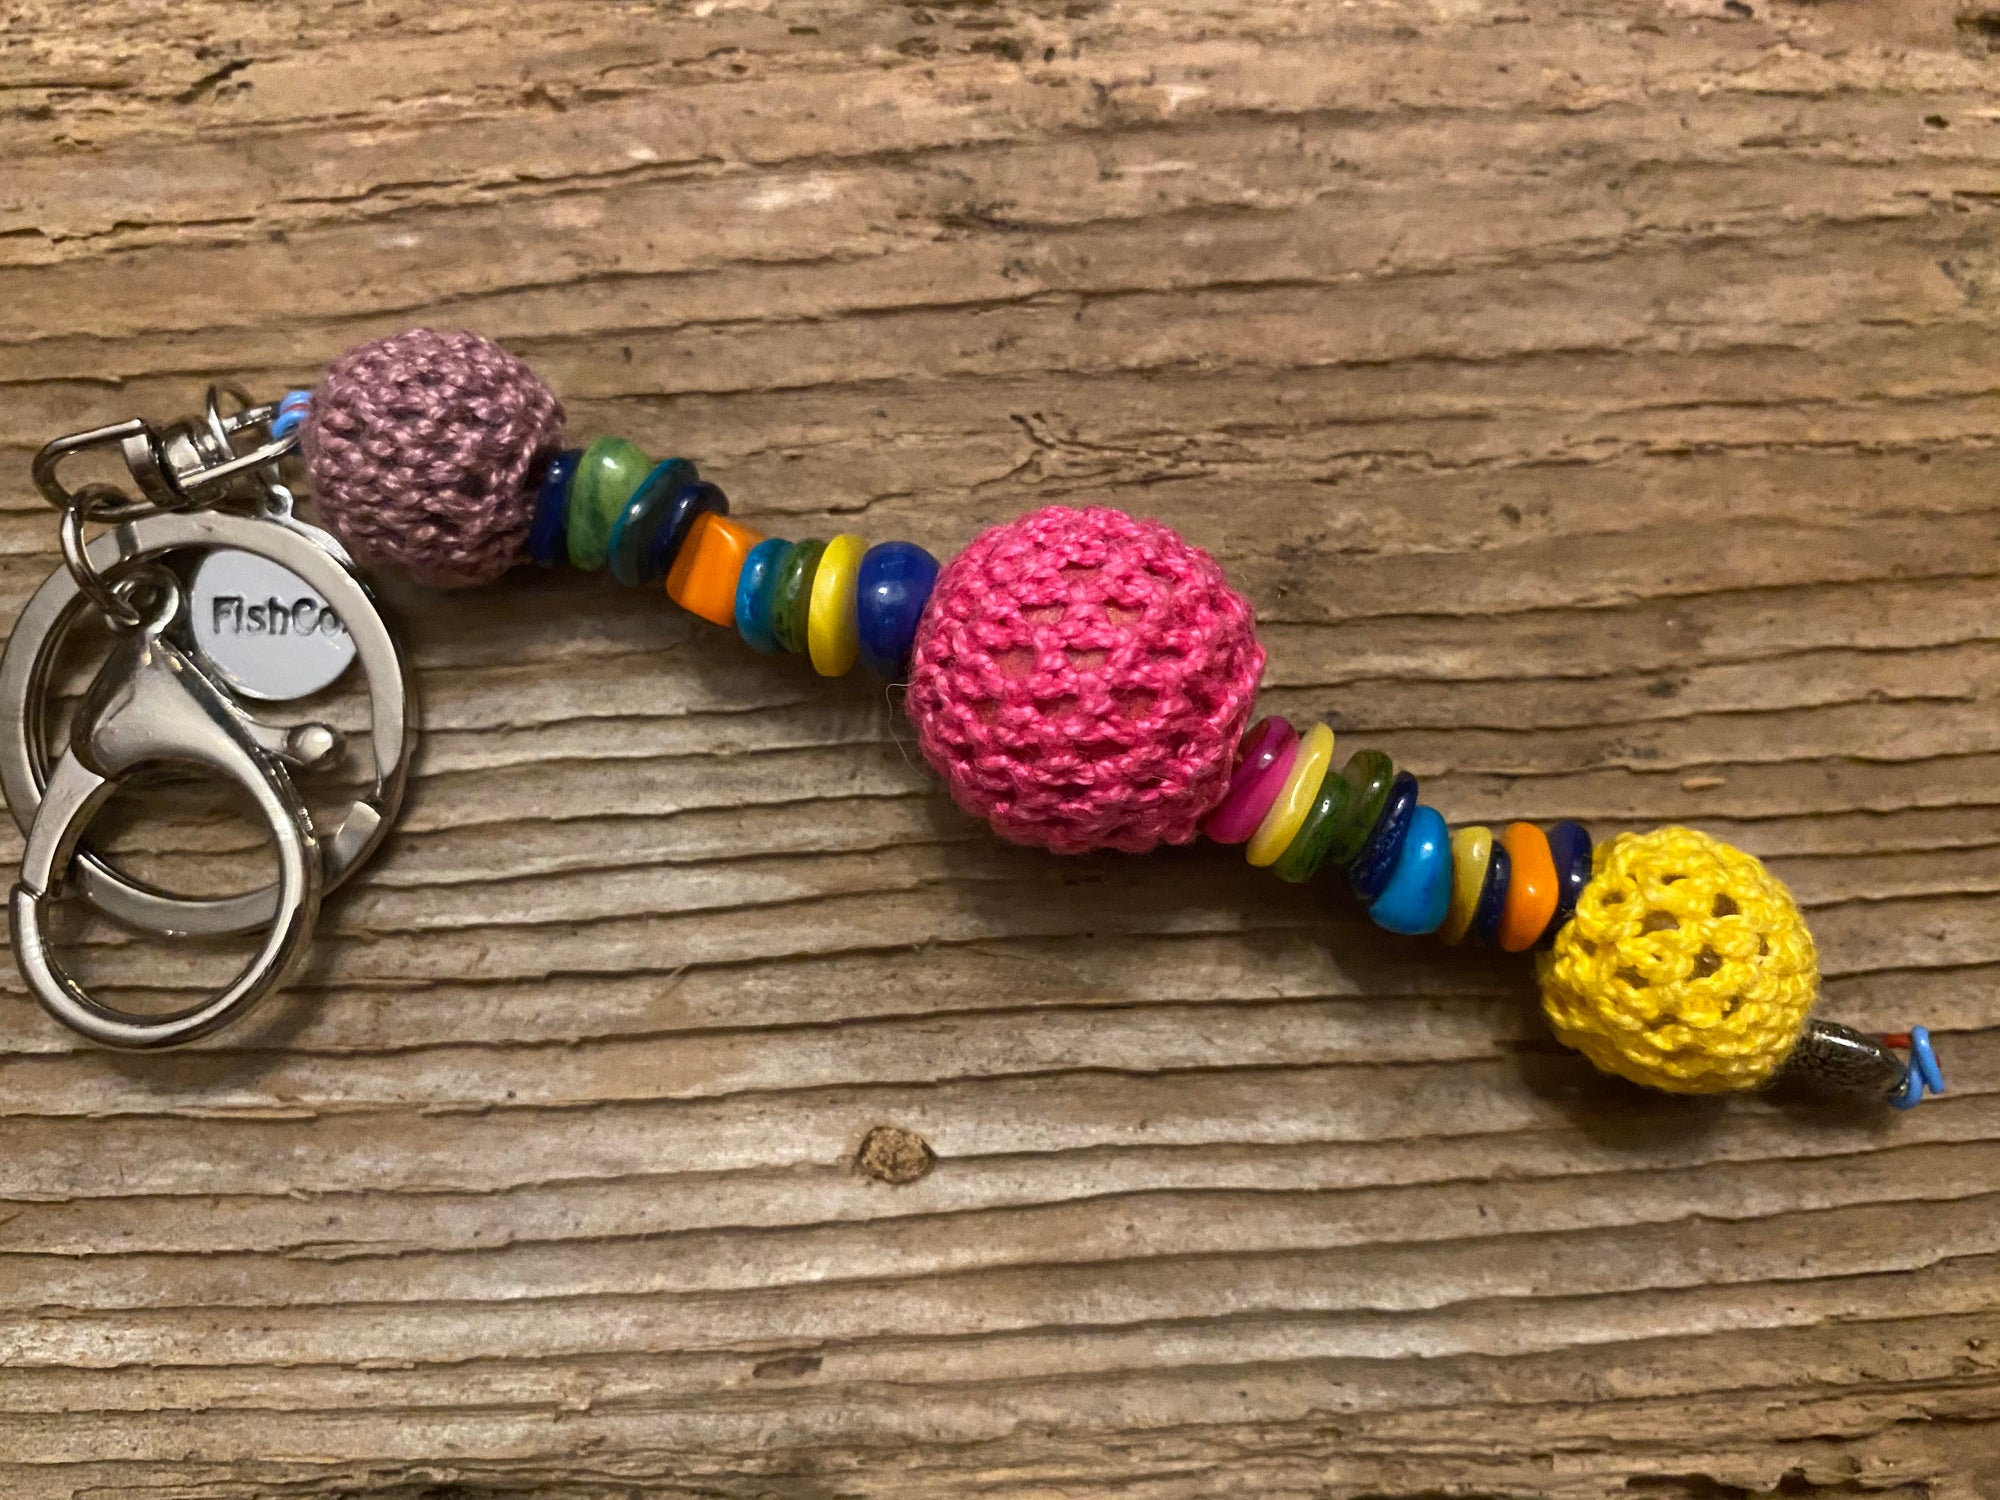 Shanga Keychain, lavender, hot pink and lemon macrame beads with multi-colored polished stone accents